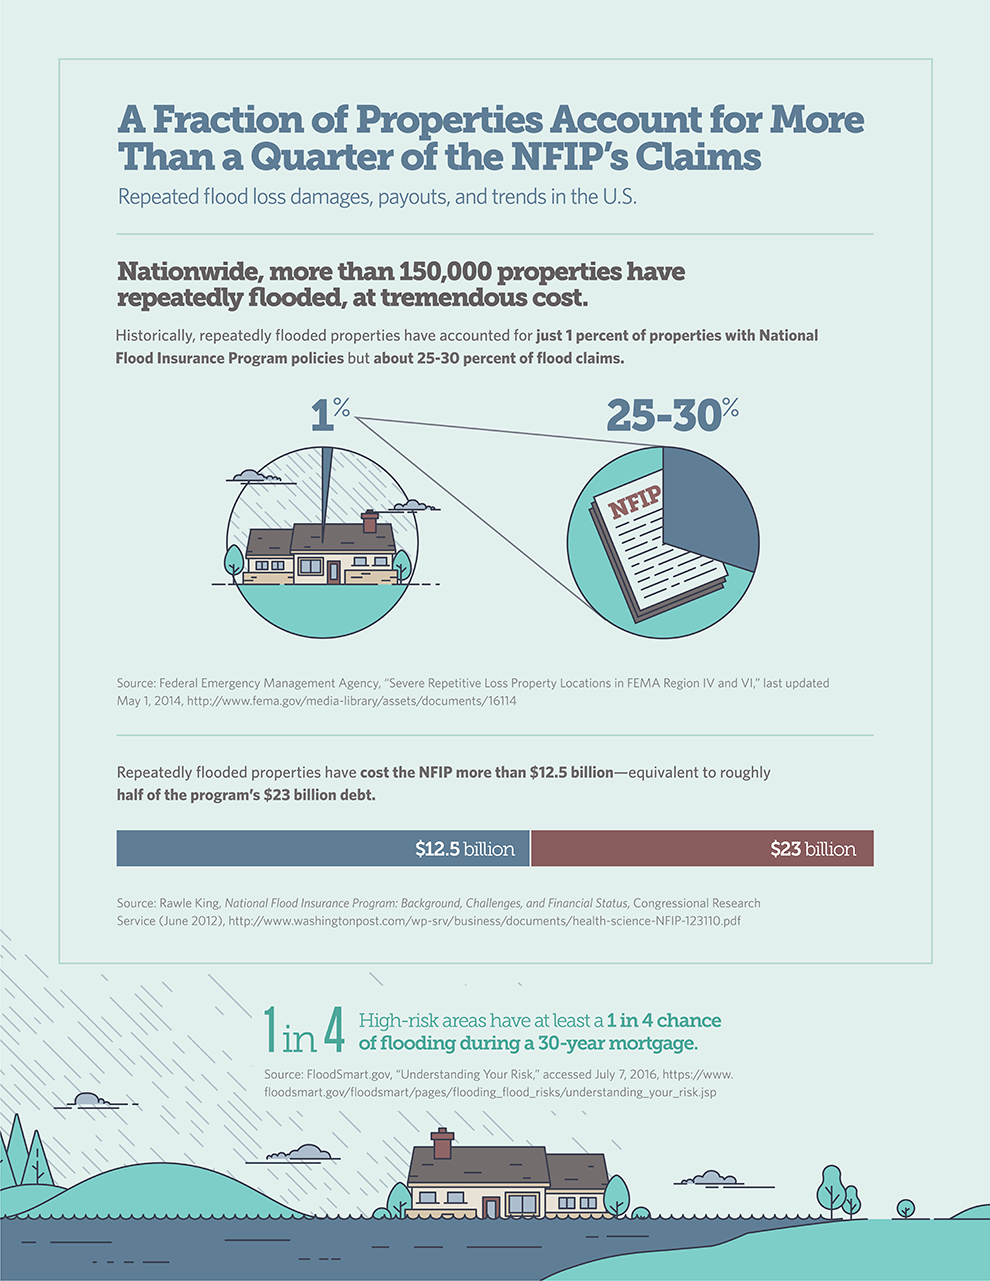 A Fraction of Properties Account for More Than a Quarter of the NFIP’s Claims